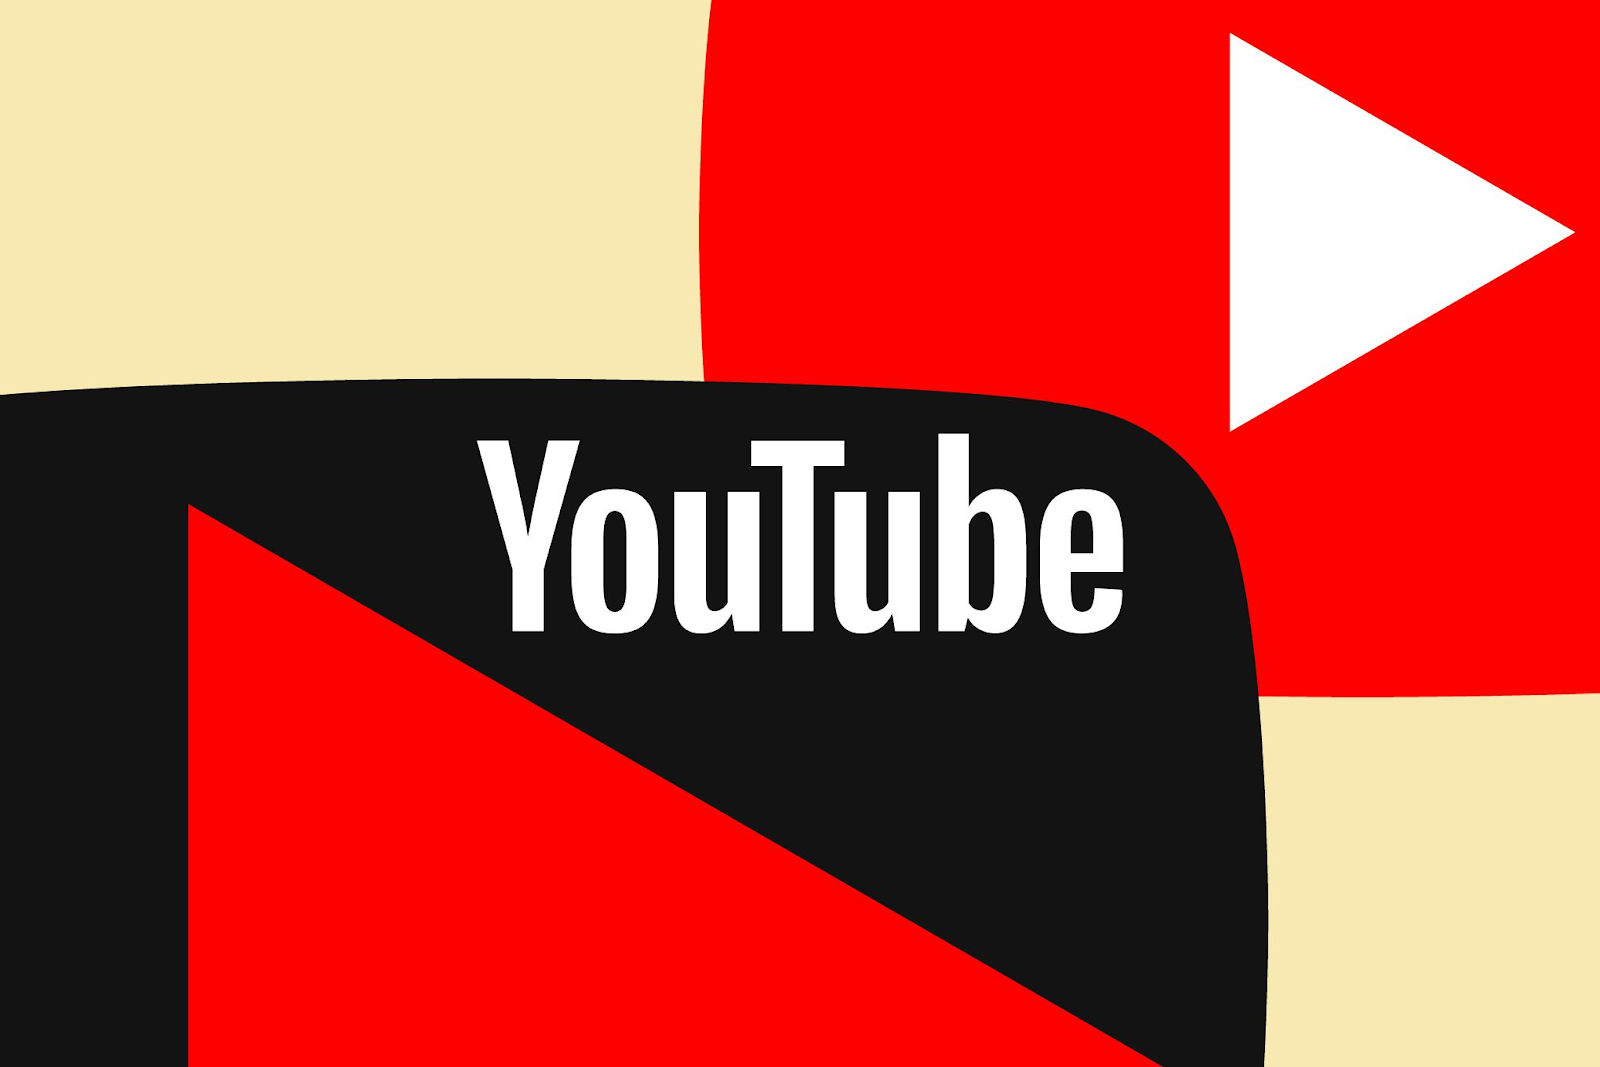 YouTube CEO: Using Platform’s Videos to Train AI Violates Terms of Service
AI News, Arcot Group.